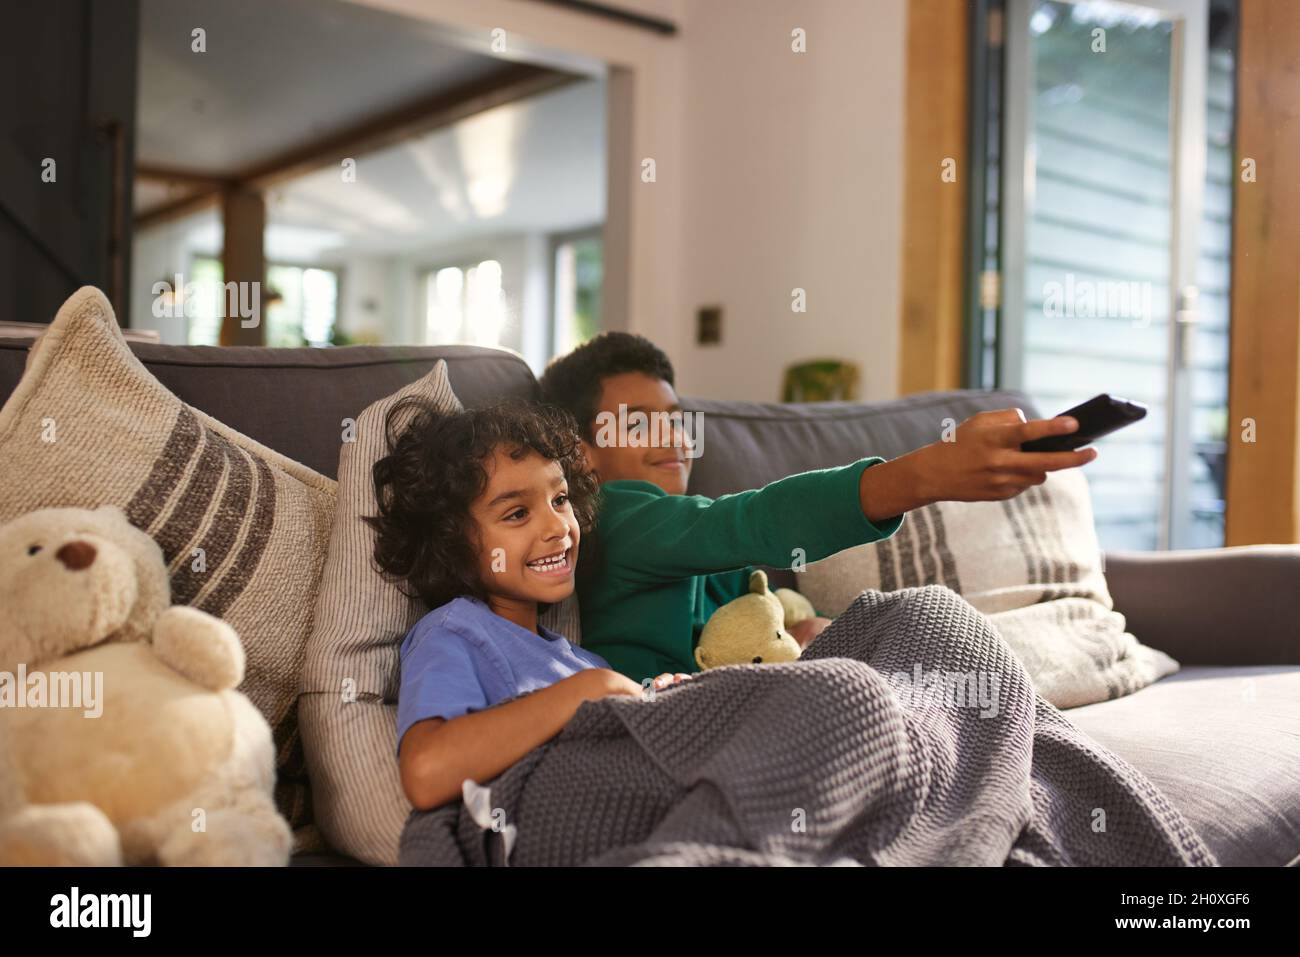 Two cheerful boys watching TV using remote control Stock Photo